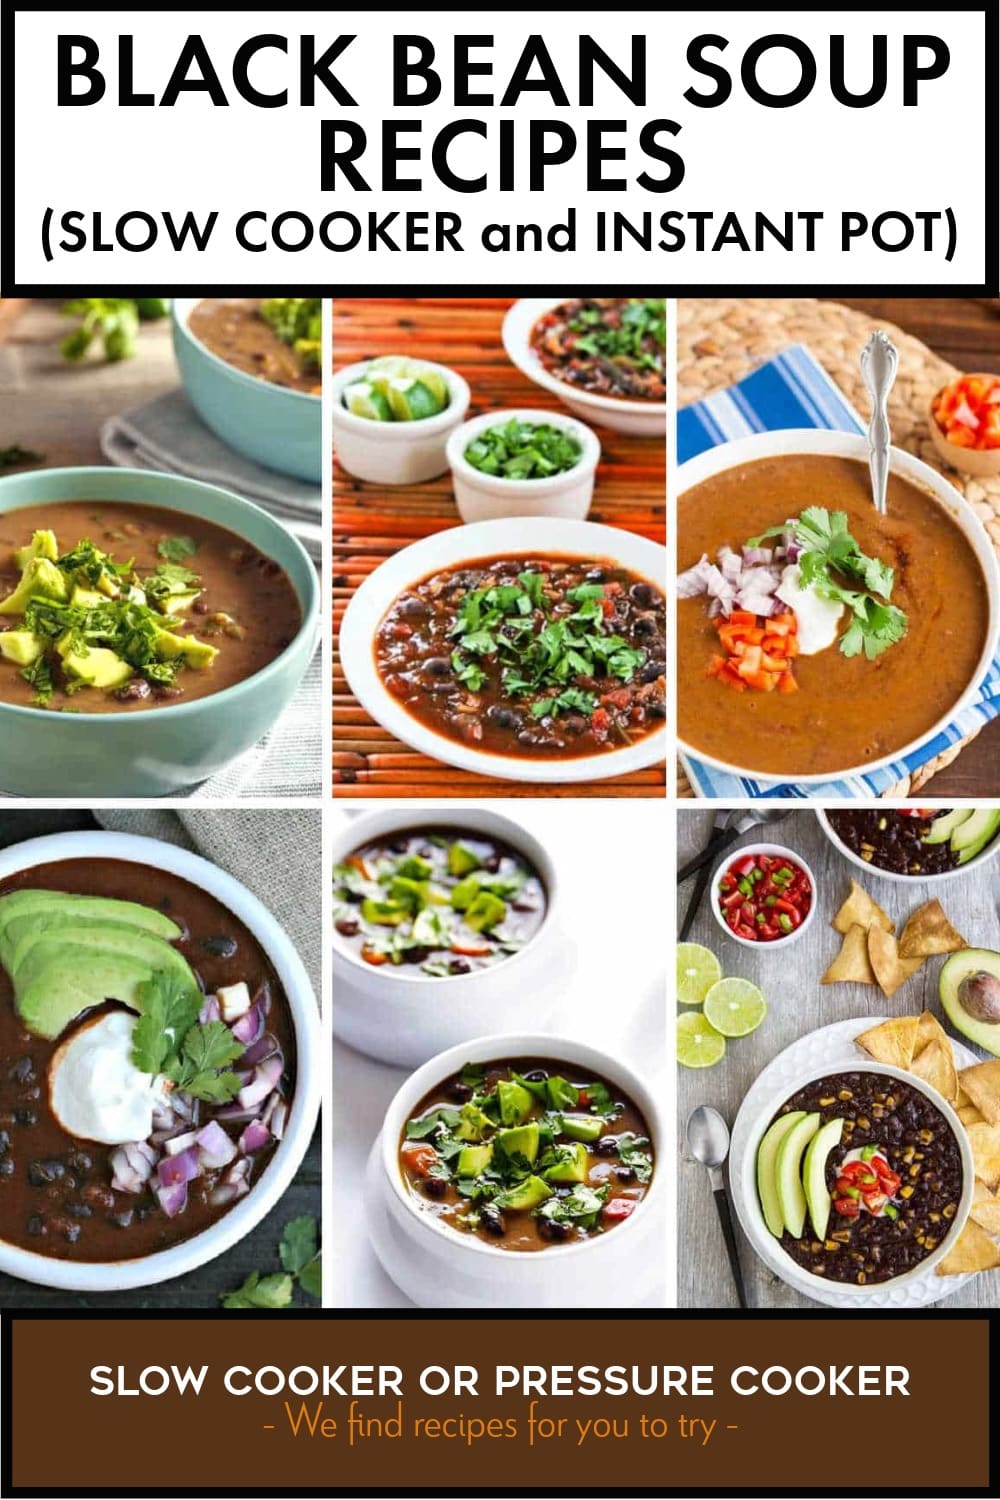 Pinterest image of Black Bean Soup Recipes (Slow Cooker and Instant Pot)